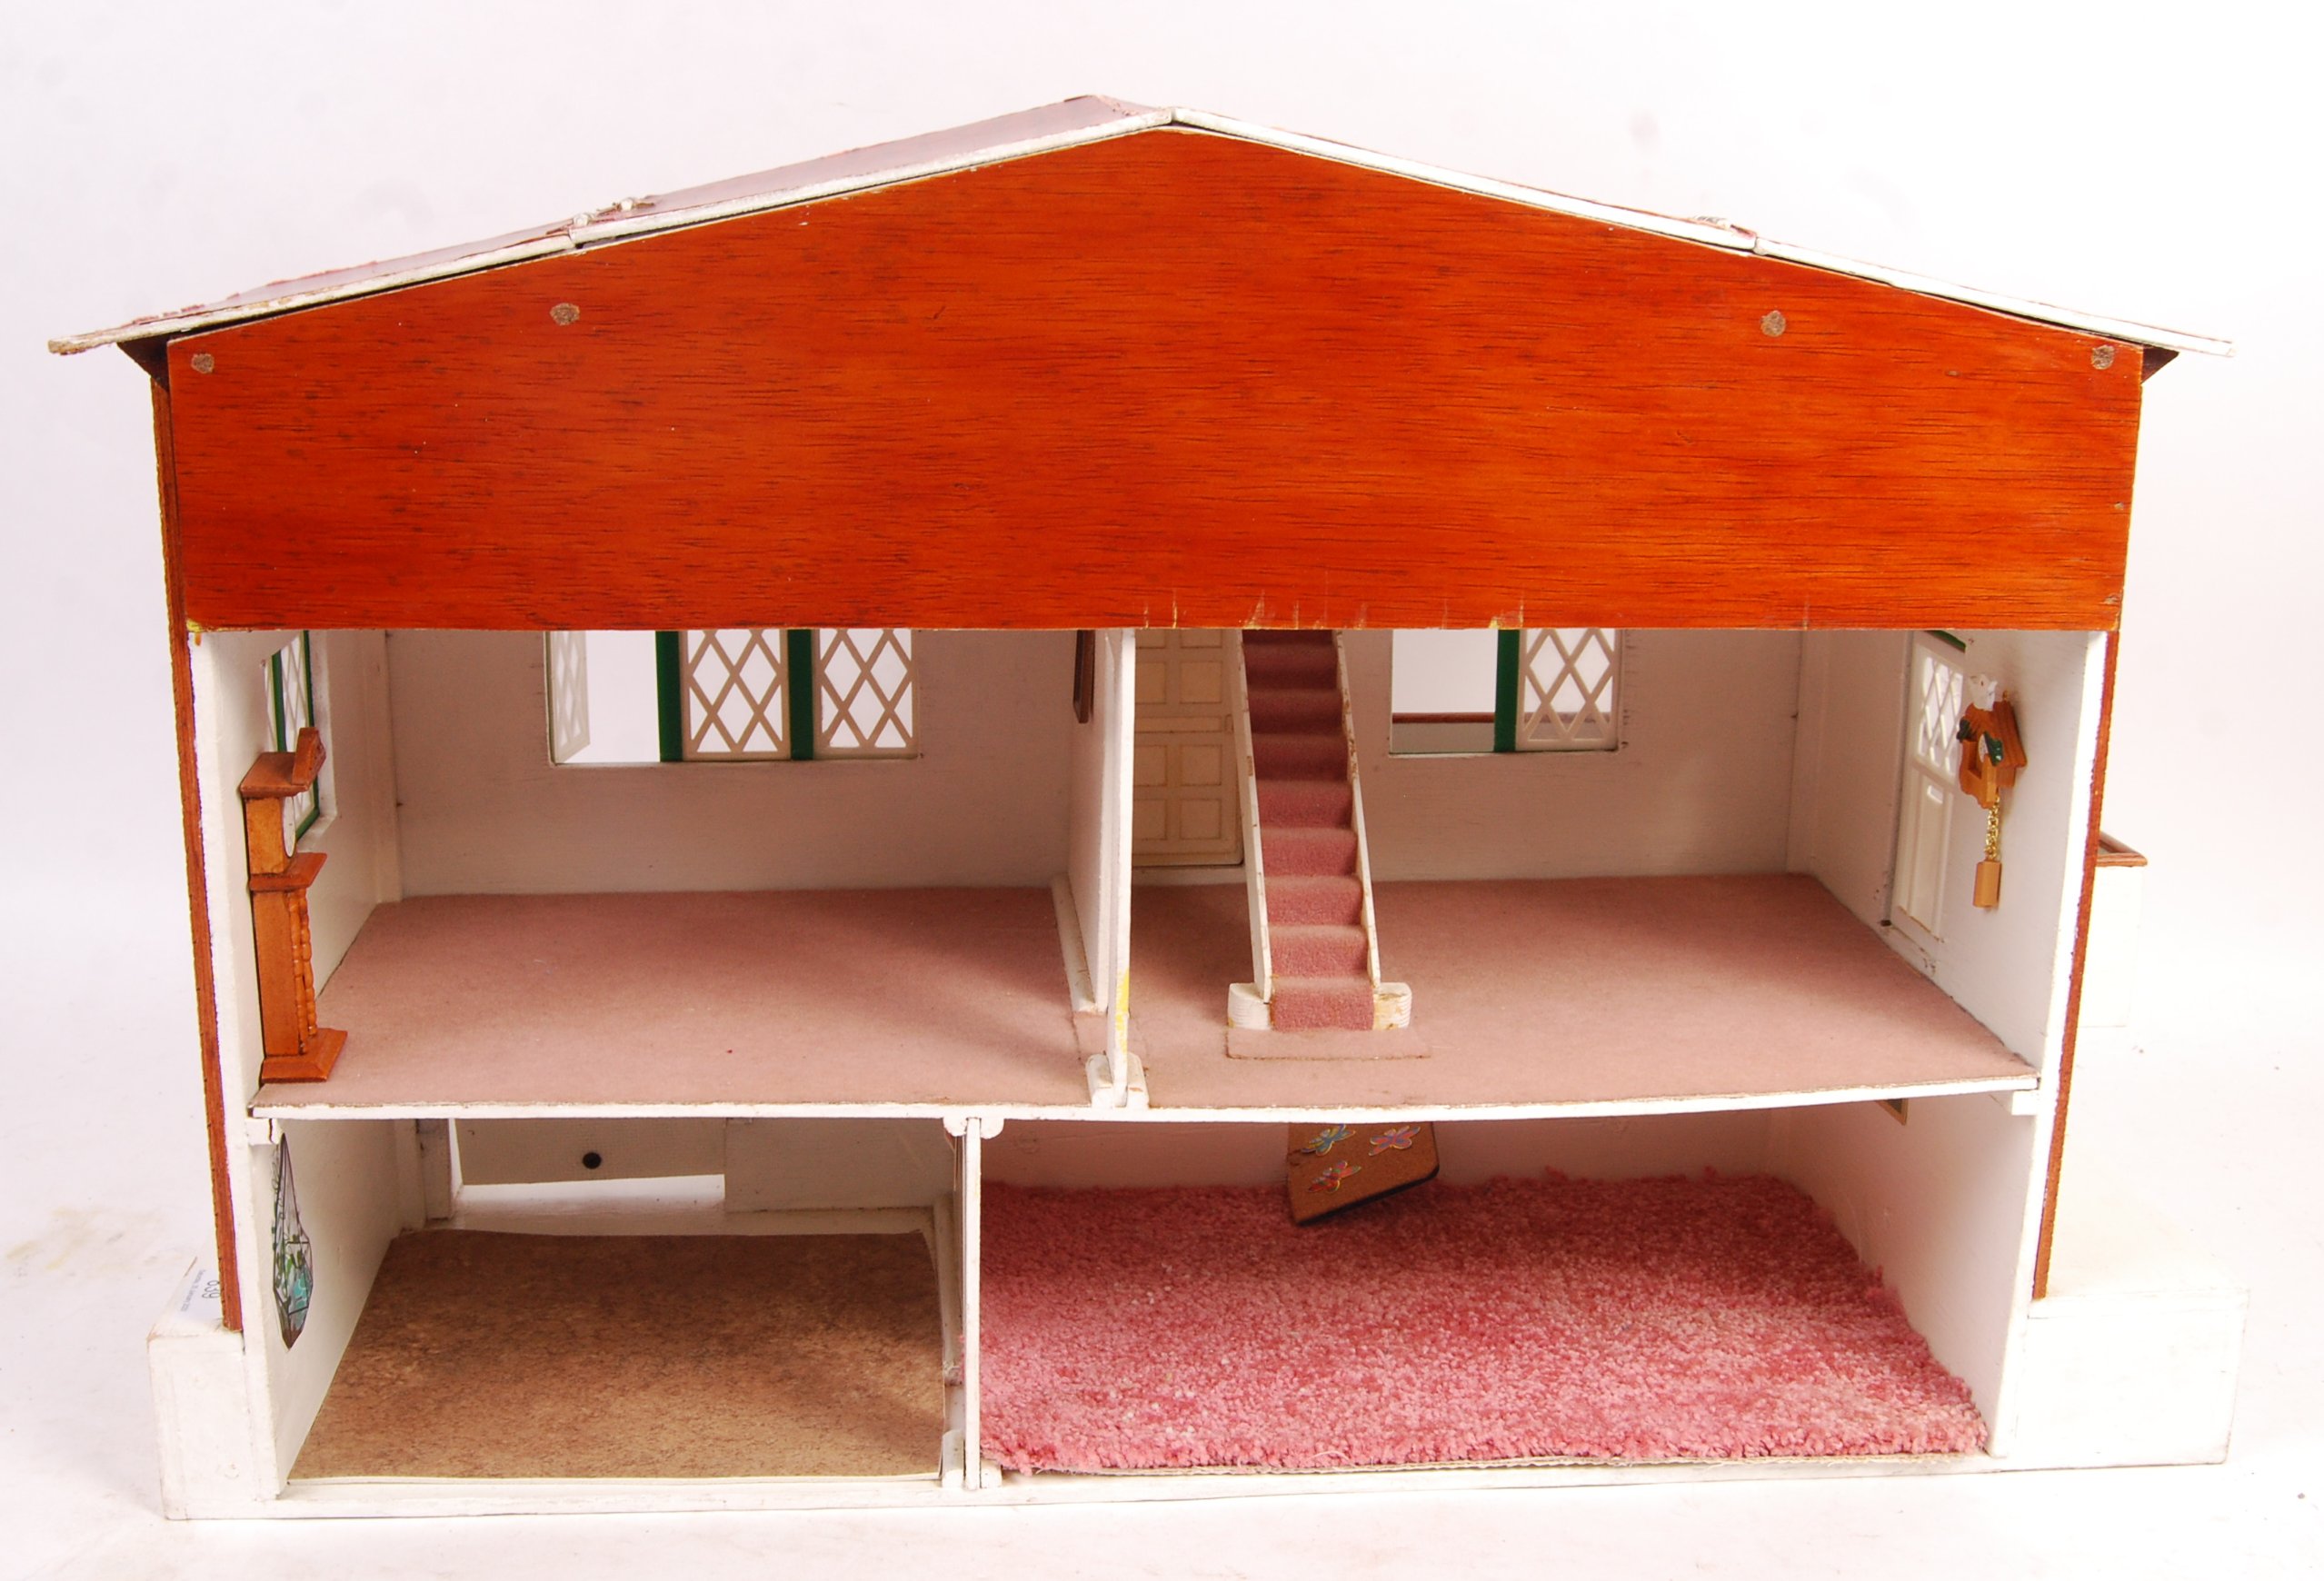 CHARMING 1960'S SWISS CHALET DOLLS HOUSE AND FURNITURE - Image 4 of 4